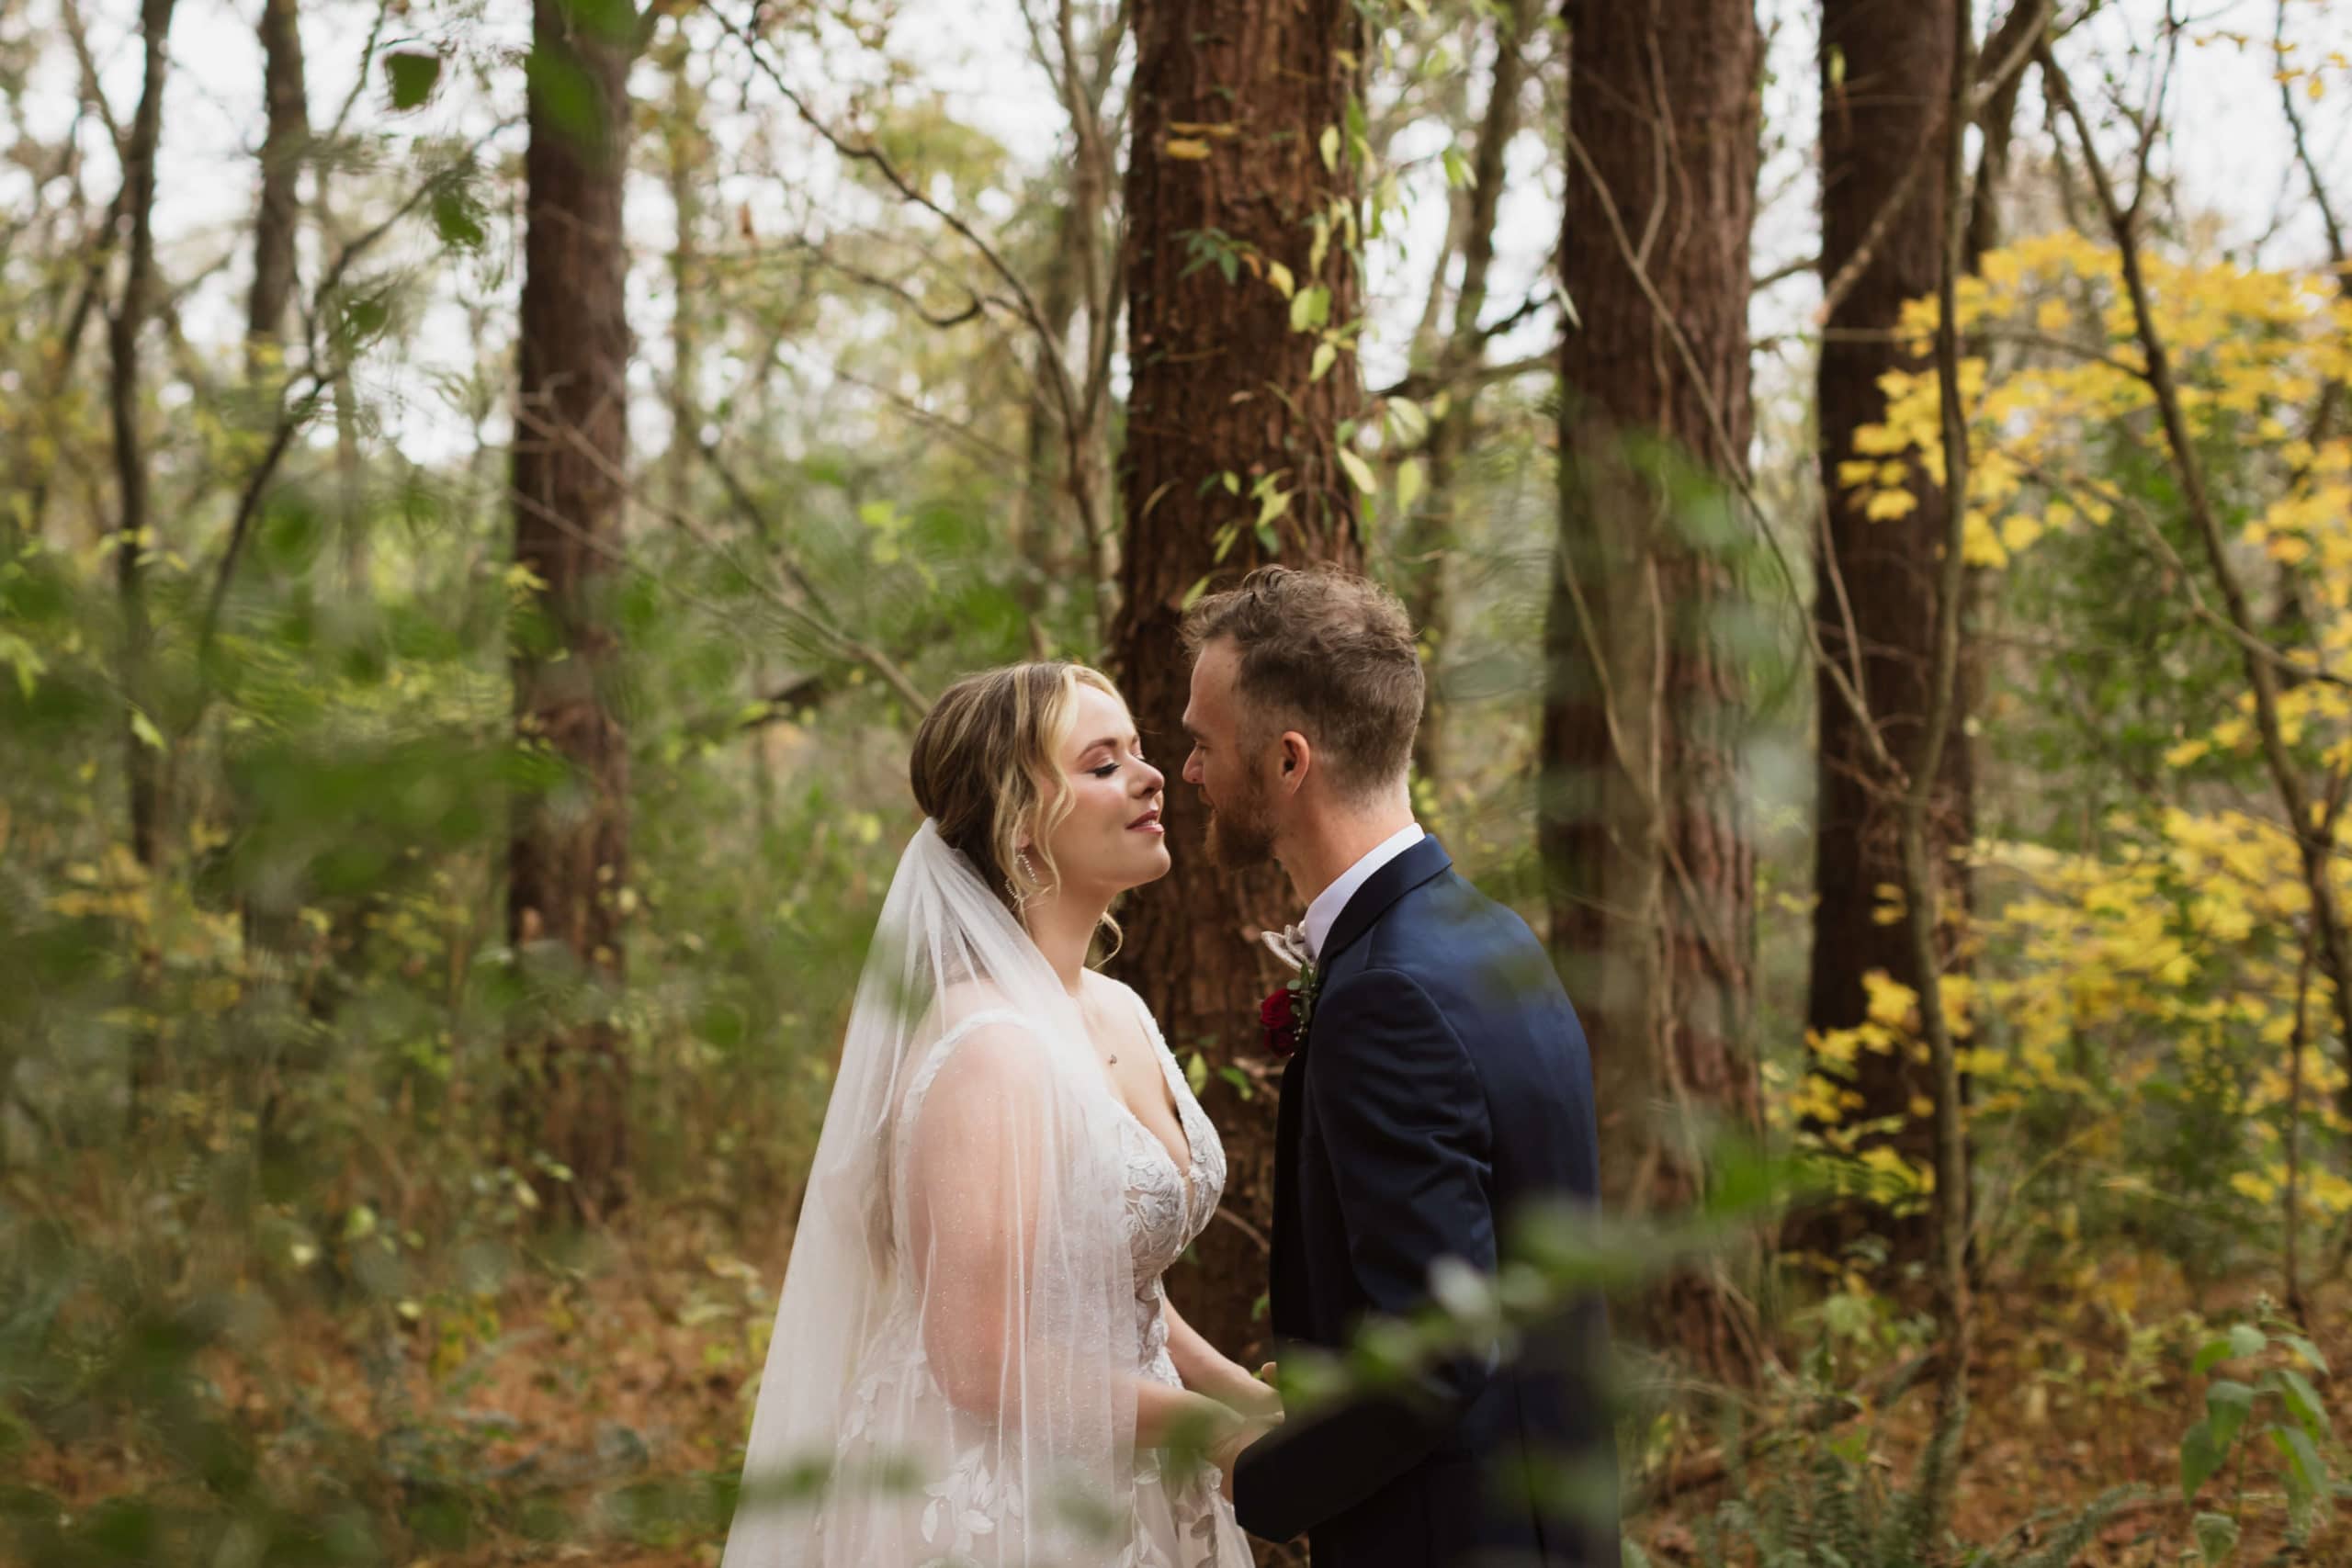 Forest first look session at Hiwassee River Weddings. Photo by OkCrowe Photography.